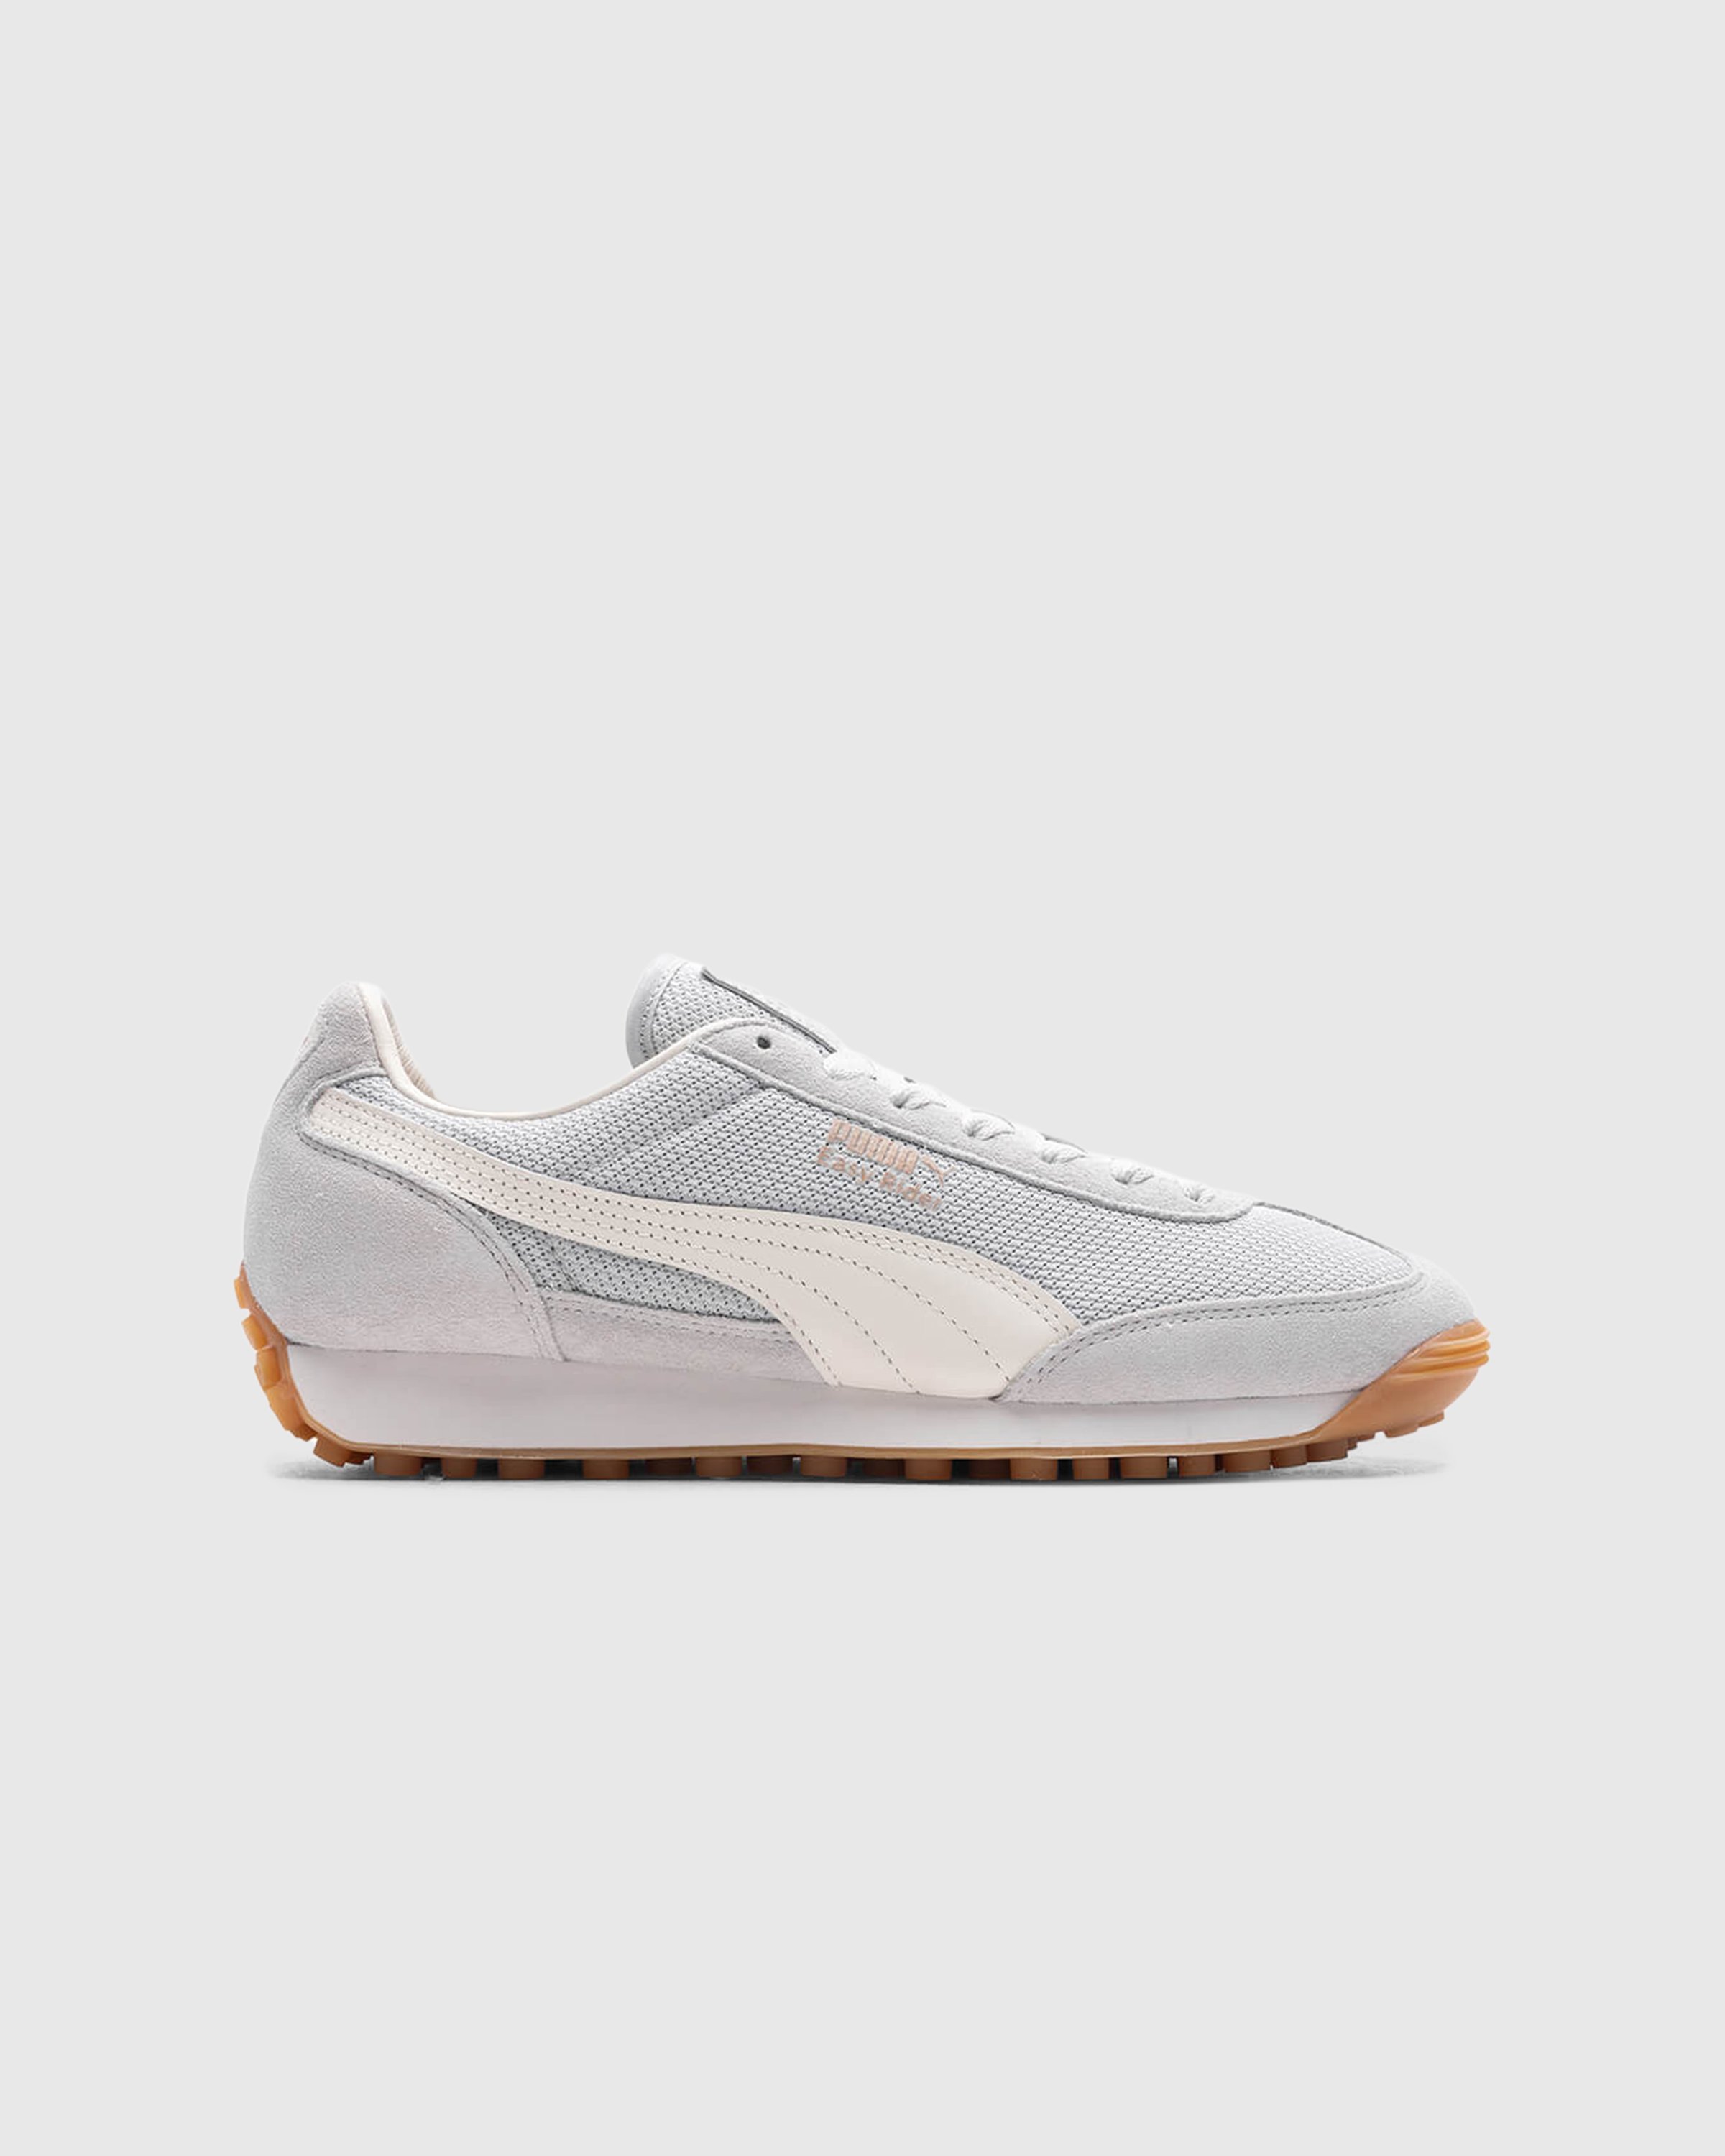 Puma - Easy Rider Premium Glacial Gray-Frosted Ivory - Footwear - Grey - Image 1